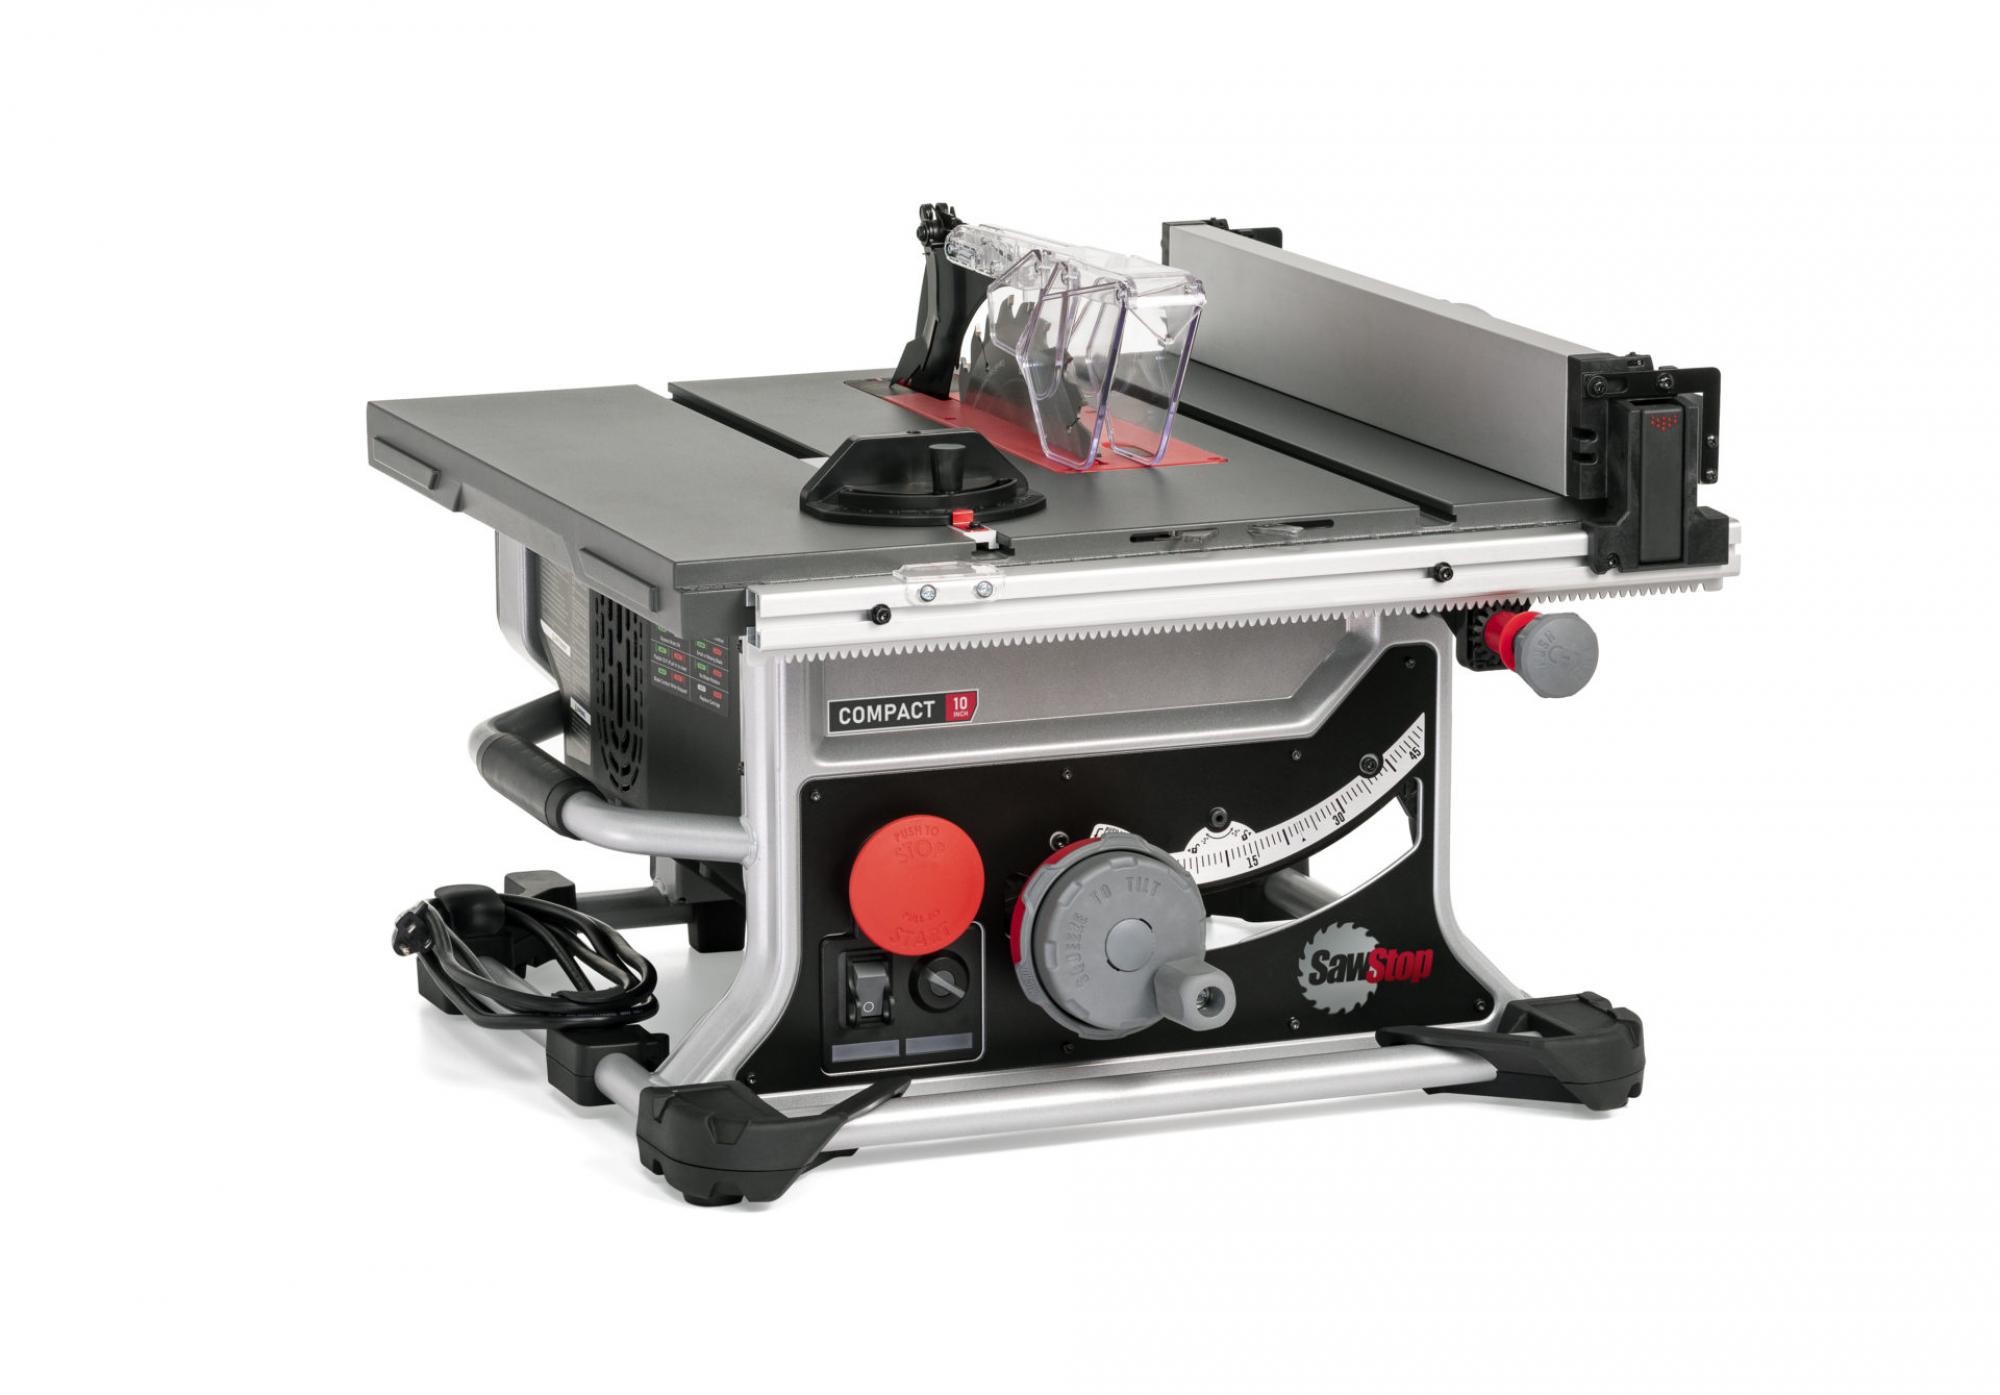 The Safest Table Saw Tech Comes to Home Workshops